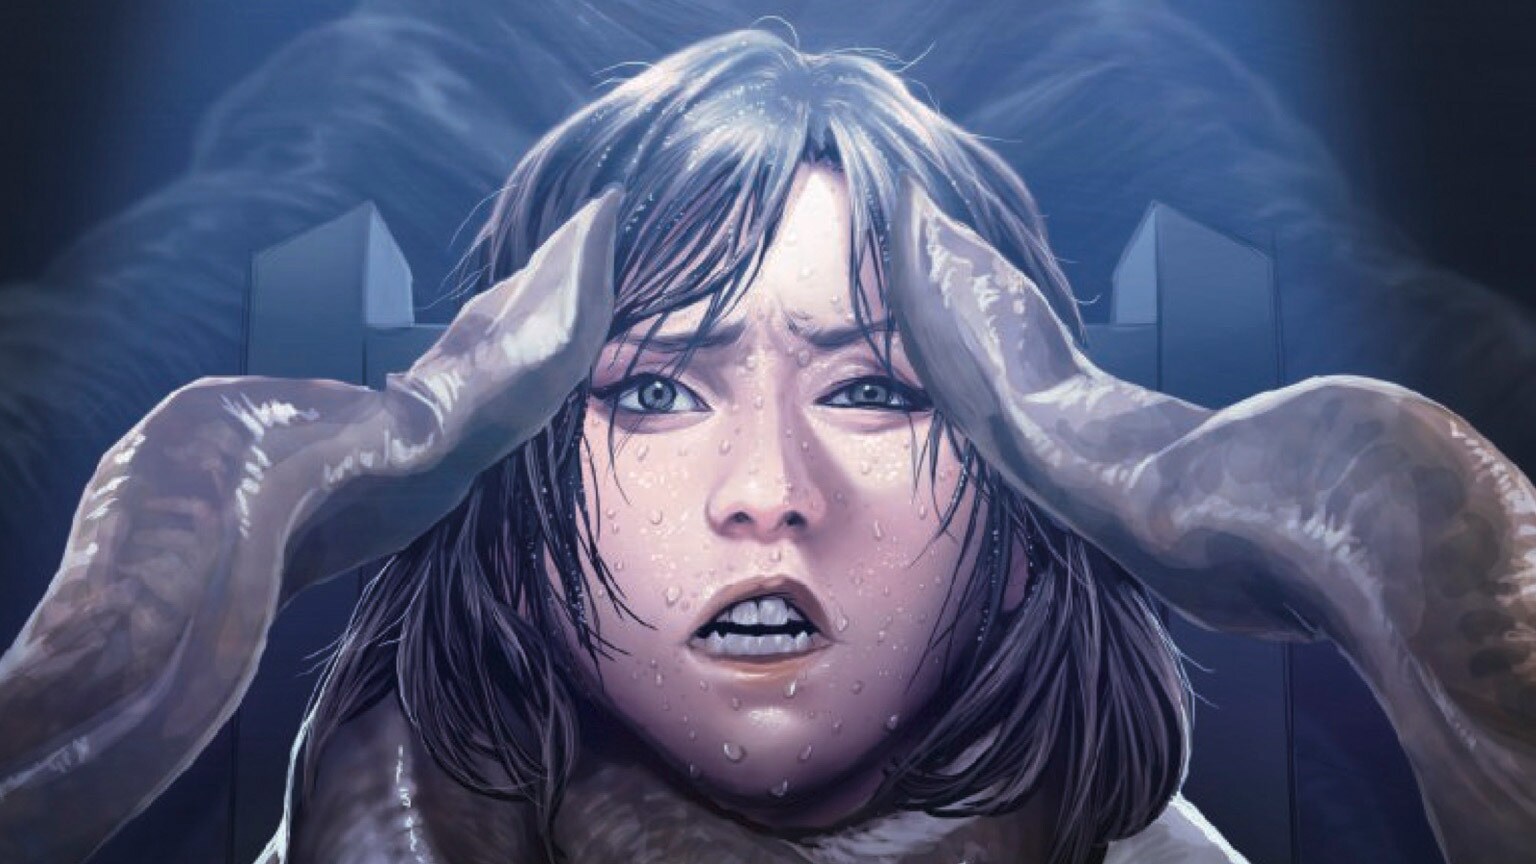 The Galaxy in Comics: Doctor Aphra #22 Balances Levity and Darkness